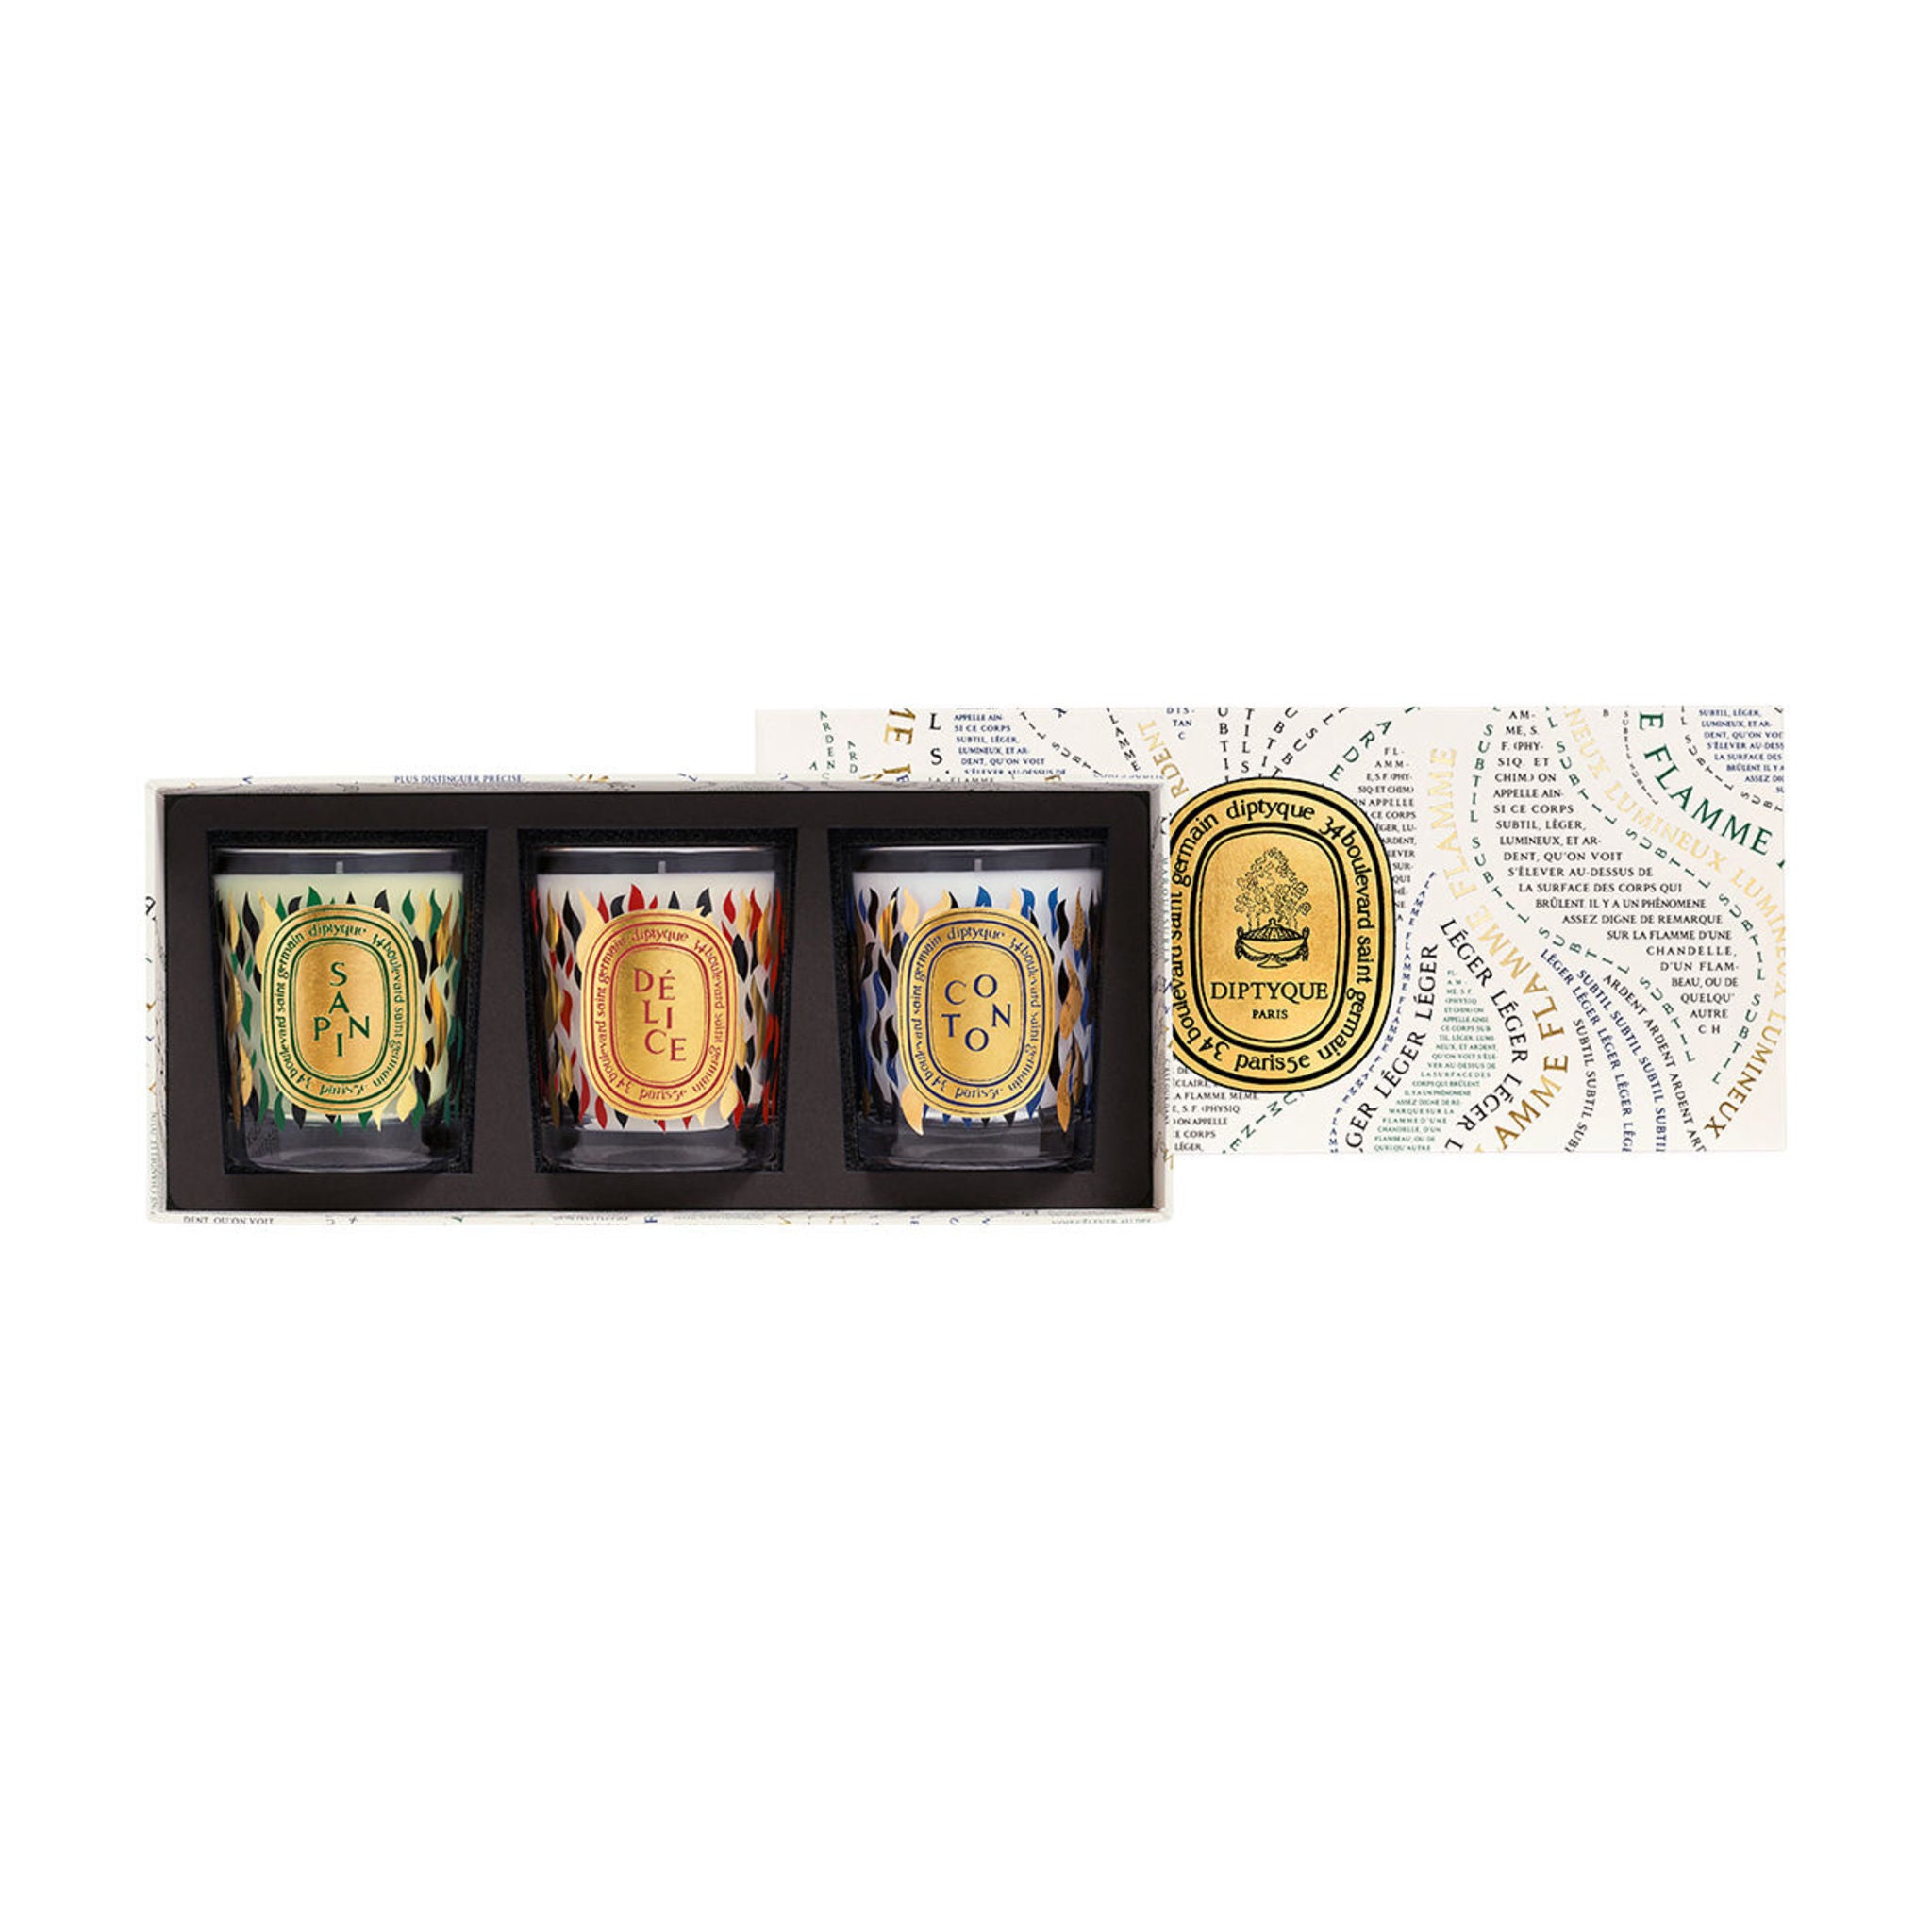 Diptyque Sapin, Coton and Delice Holiday Candle Gift Set (Limited